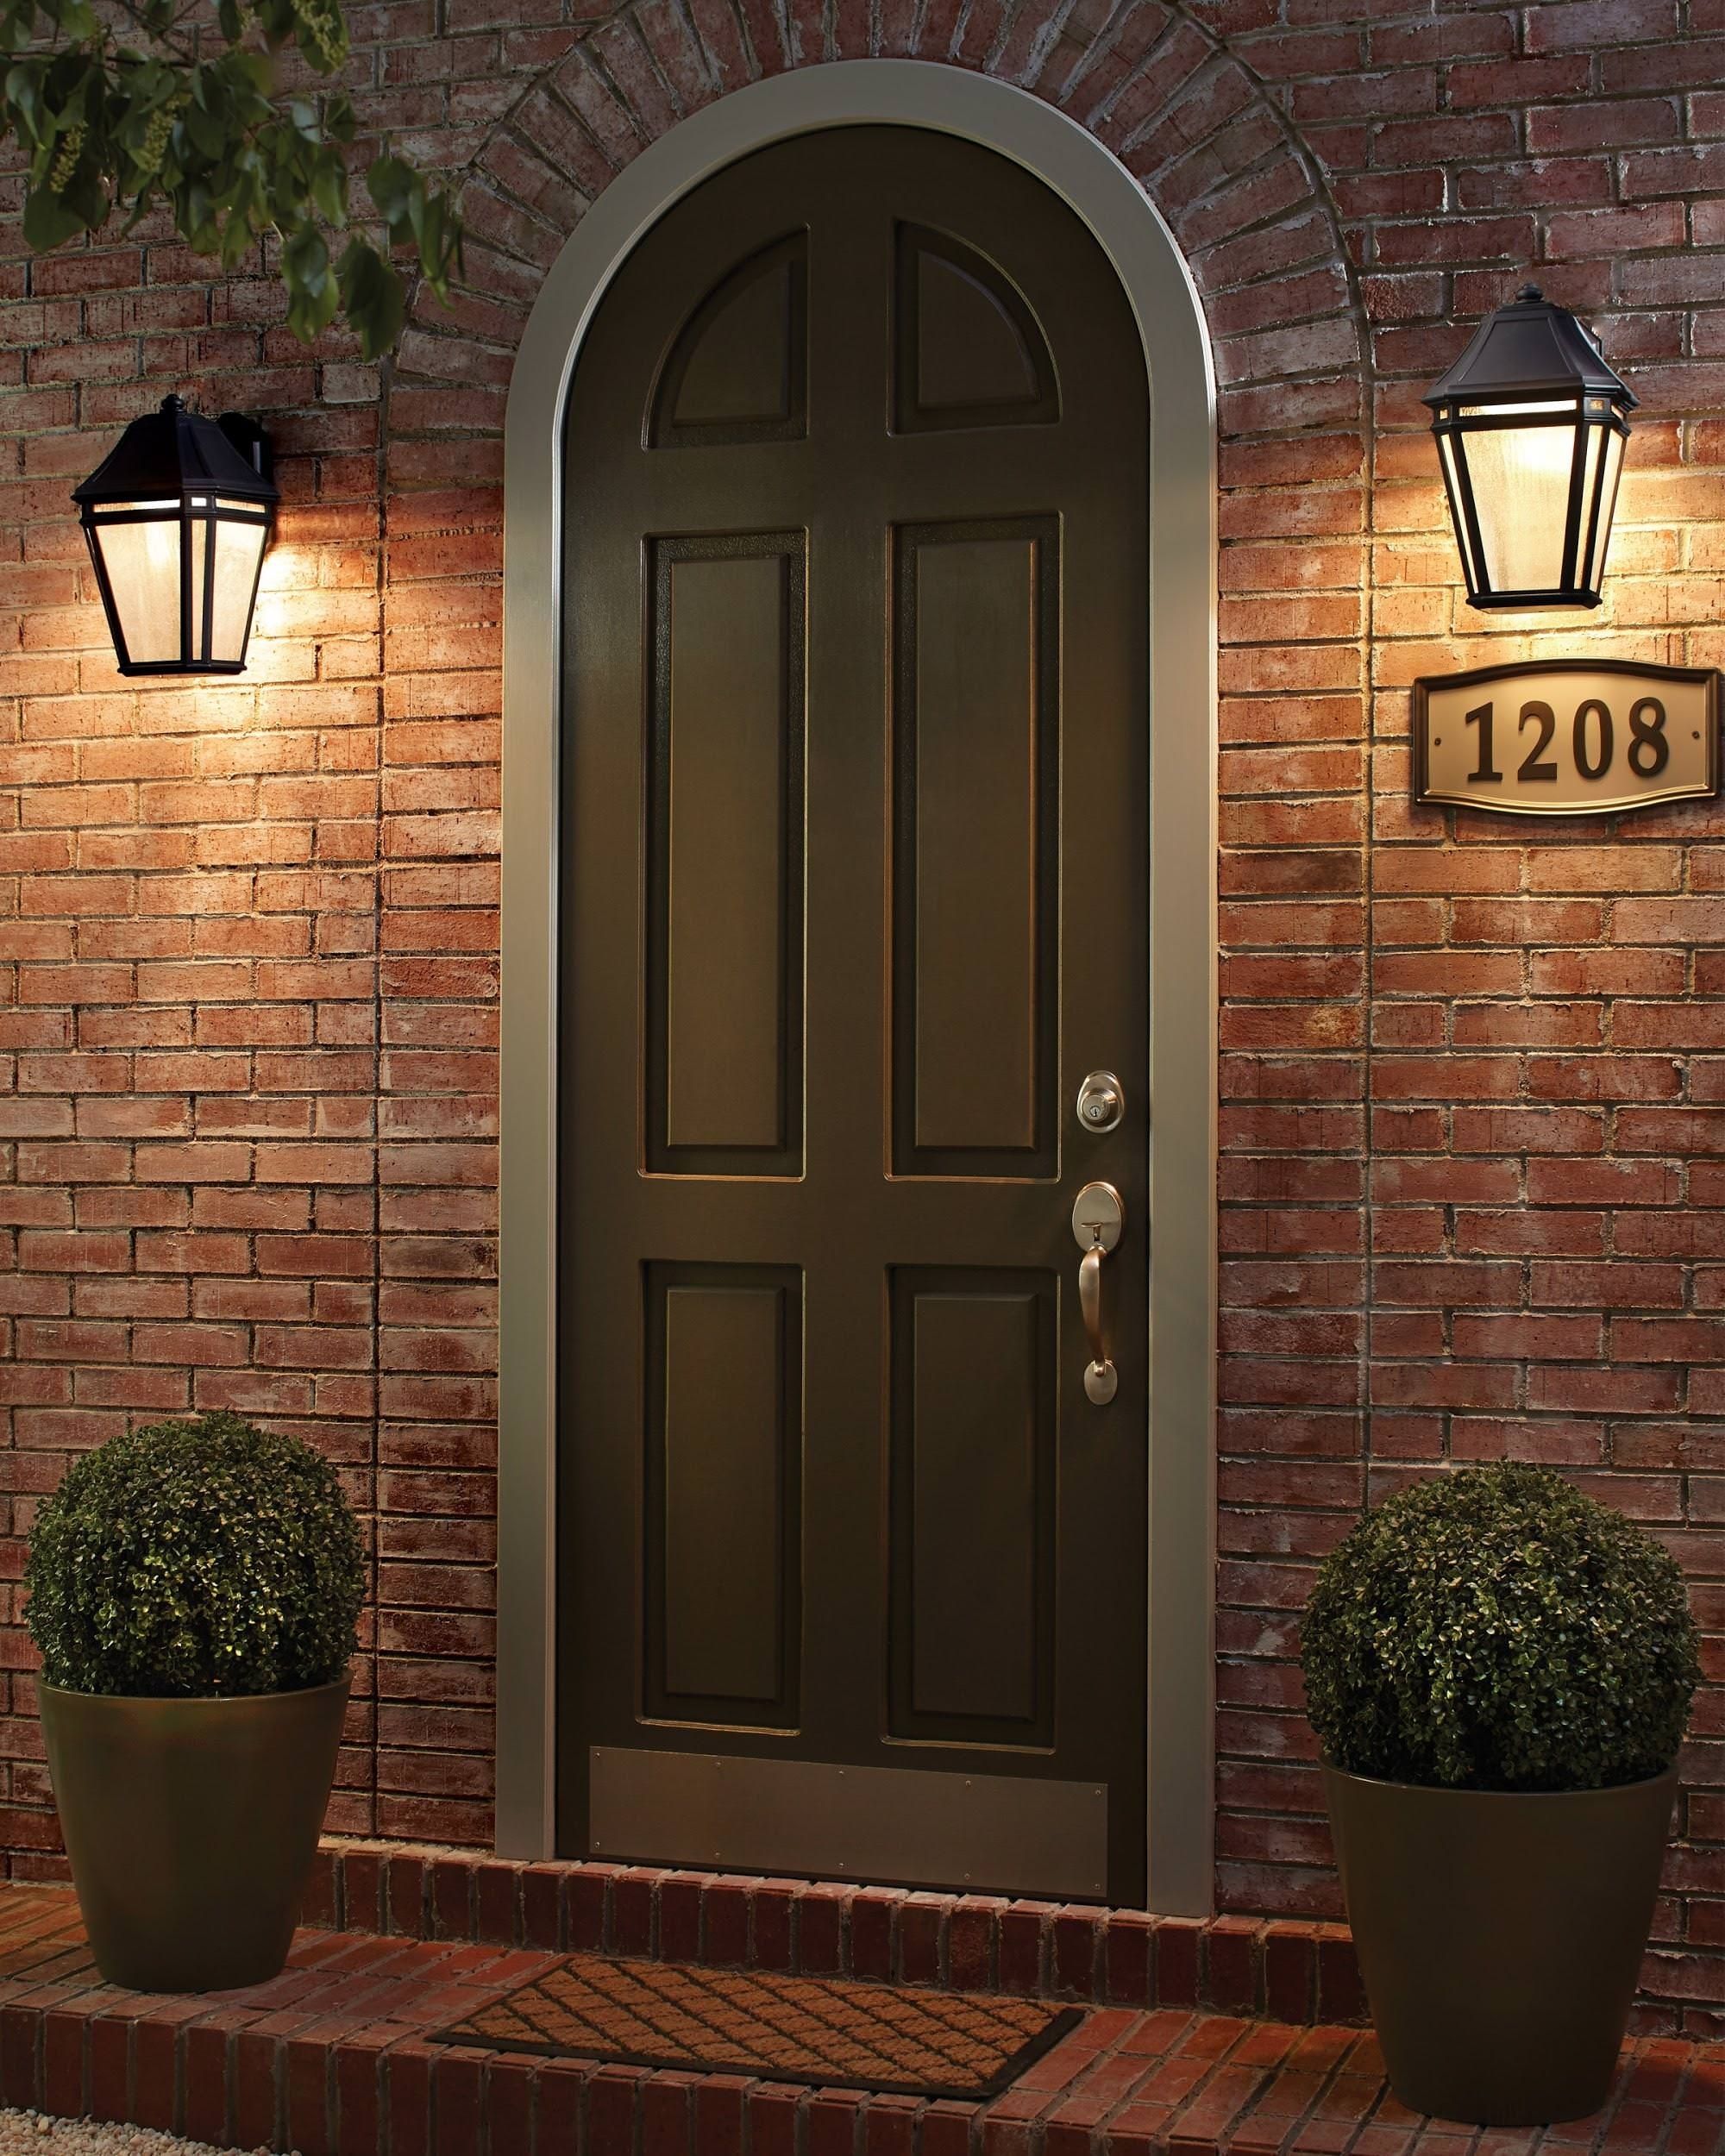 15 Different Outdoor Lighting Ideas For Your Home (all Types) Intended For Hanging Outdoor Lights On Brick (View 4 of 15)